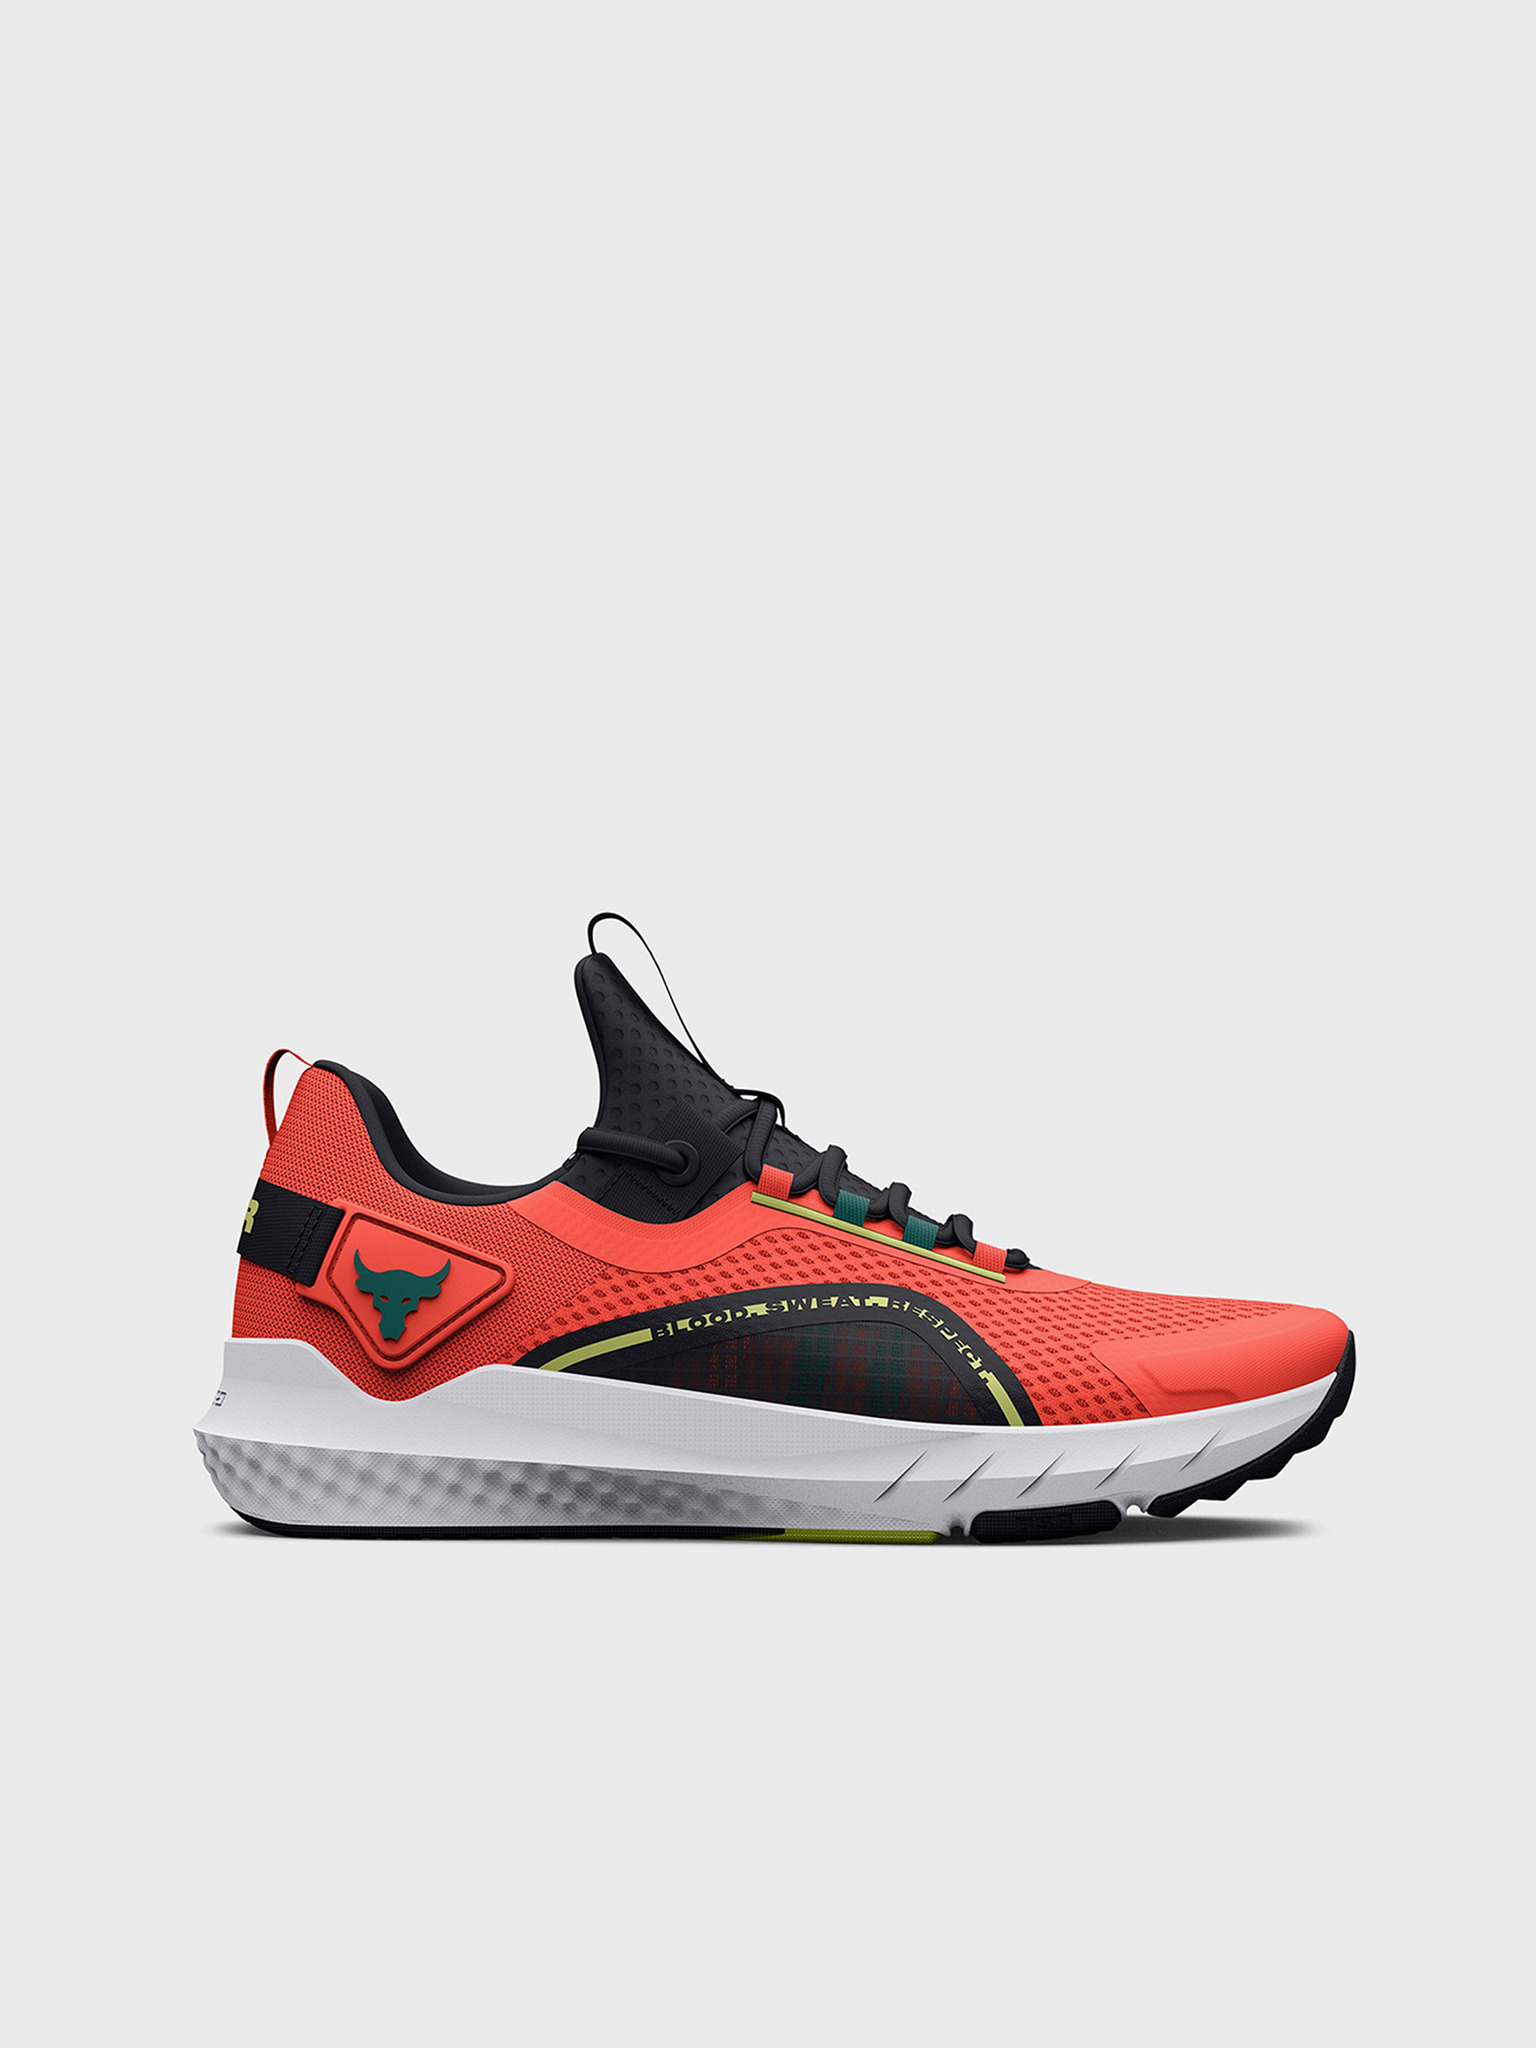 Under Armour - UA Project Rock BSR 4 Sneakers